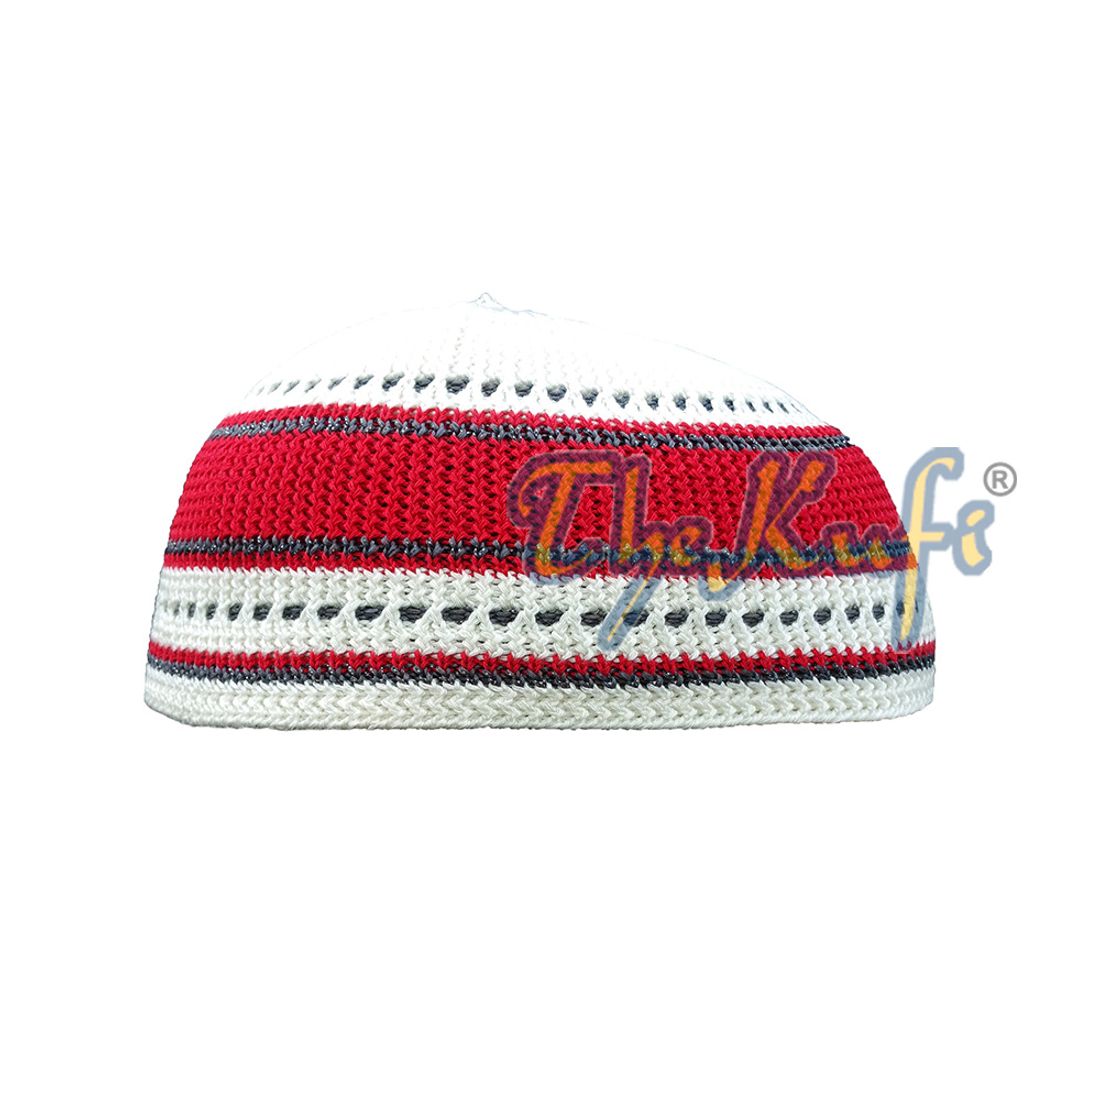 Red, Gray and Cream with Silver Thread Kufi Hat